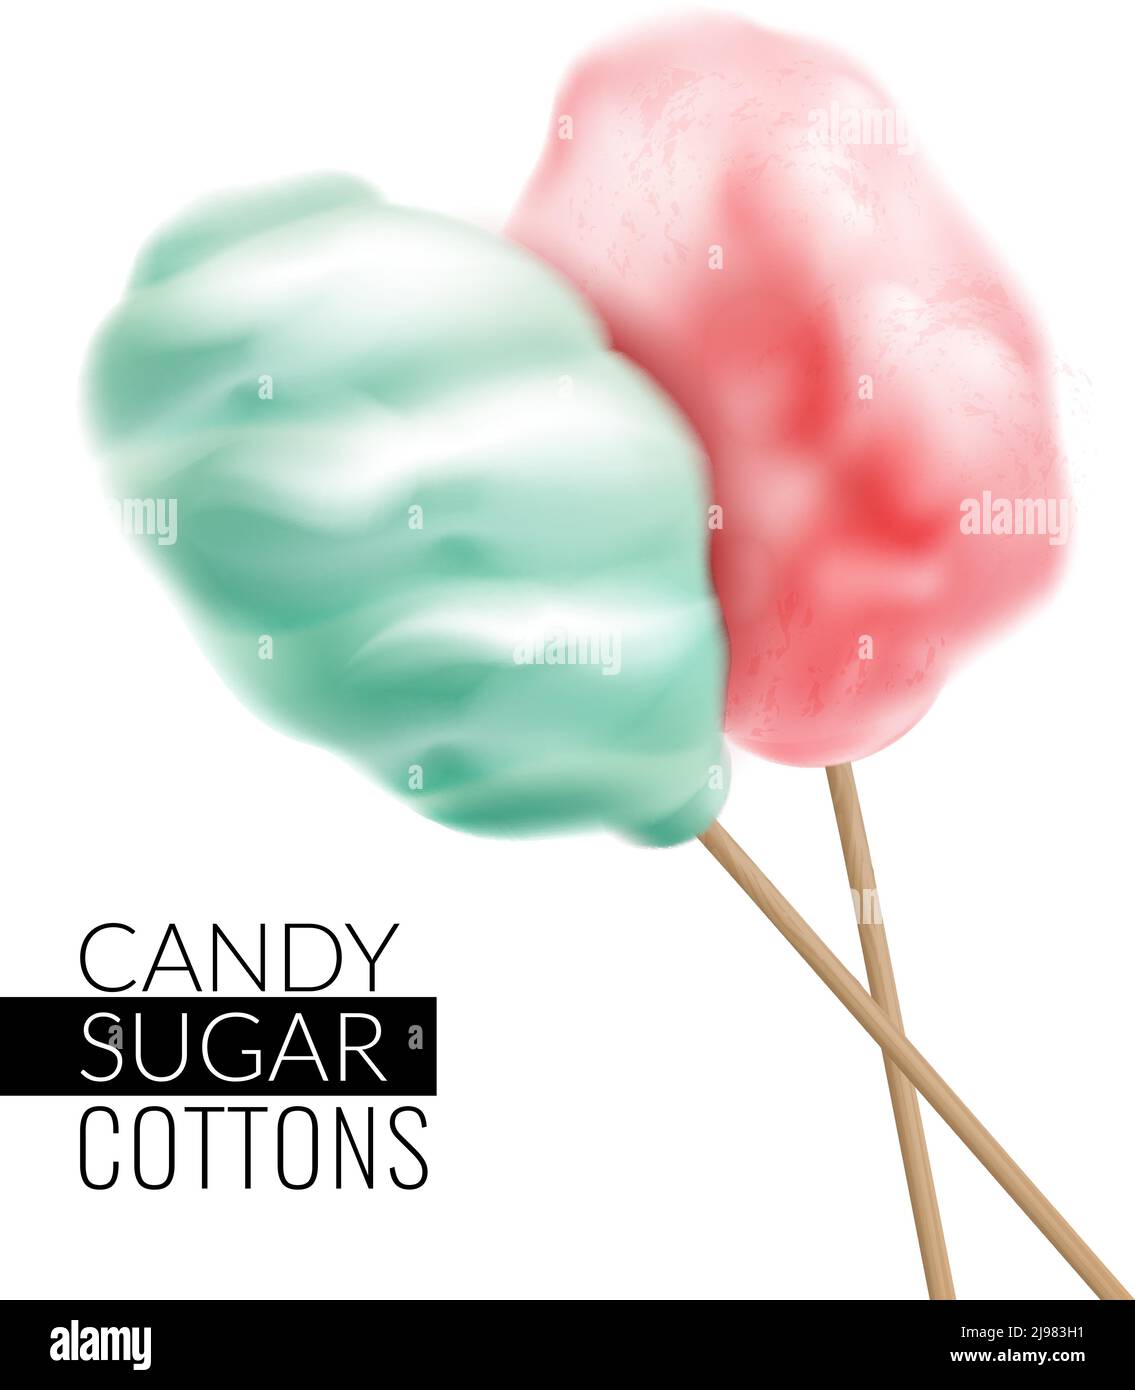 Realistic candy sugar cottons background with text and images of colourful candyfloss products on blank background vector illustration Stock Vector